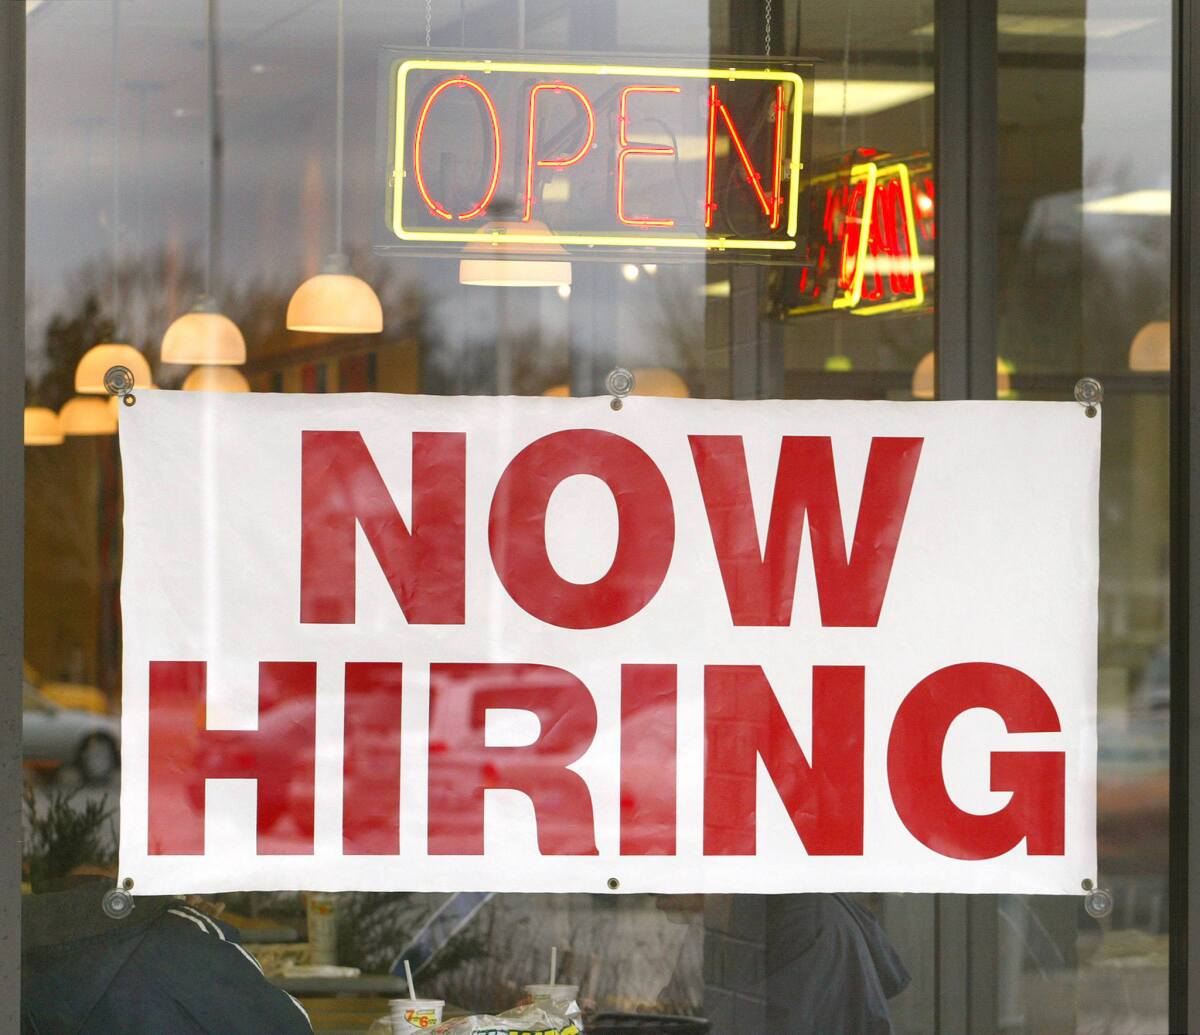 "Now Hiring" signage is visible in the window of a Subway restaurant.